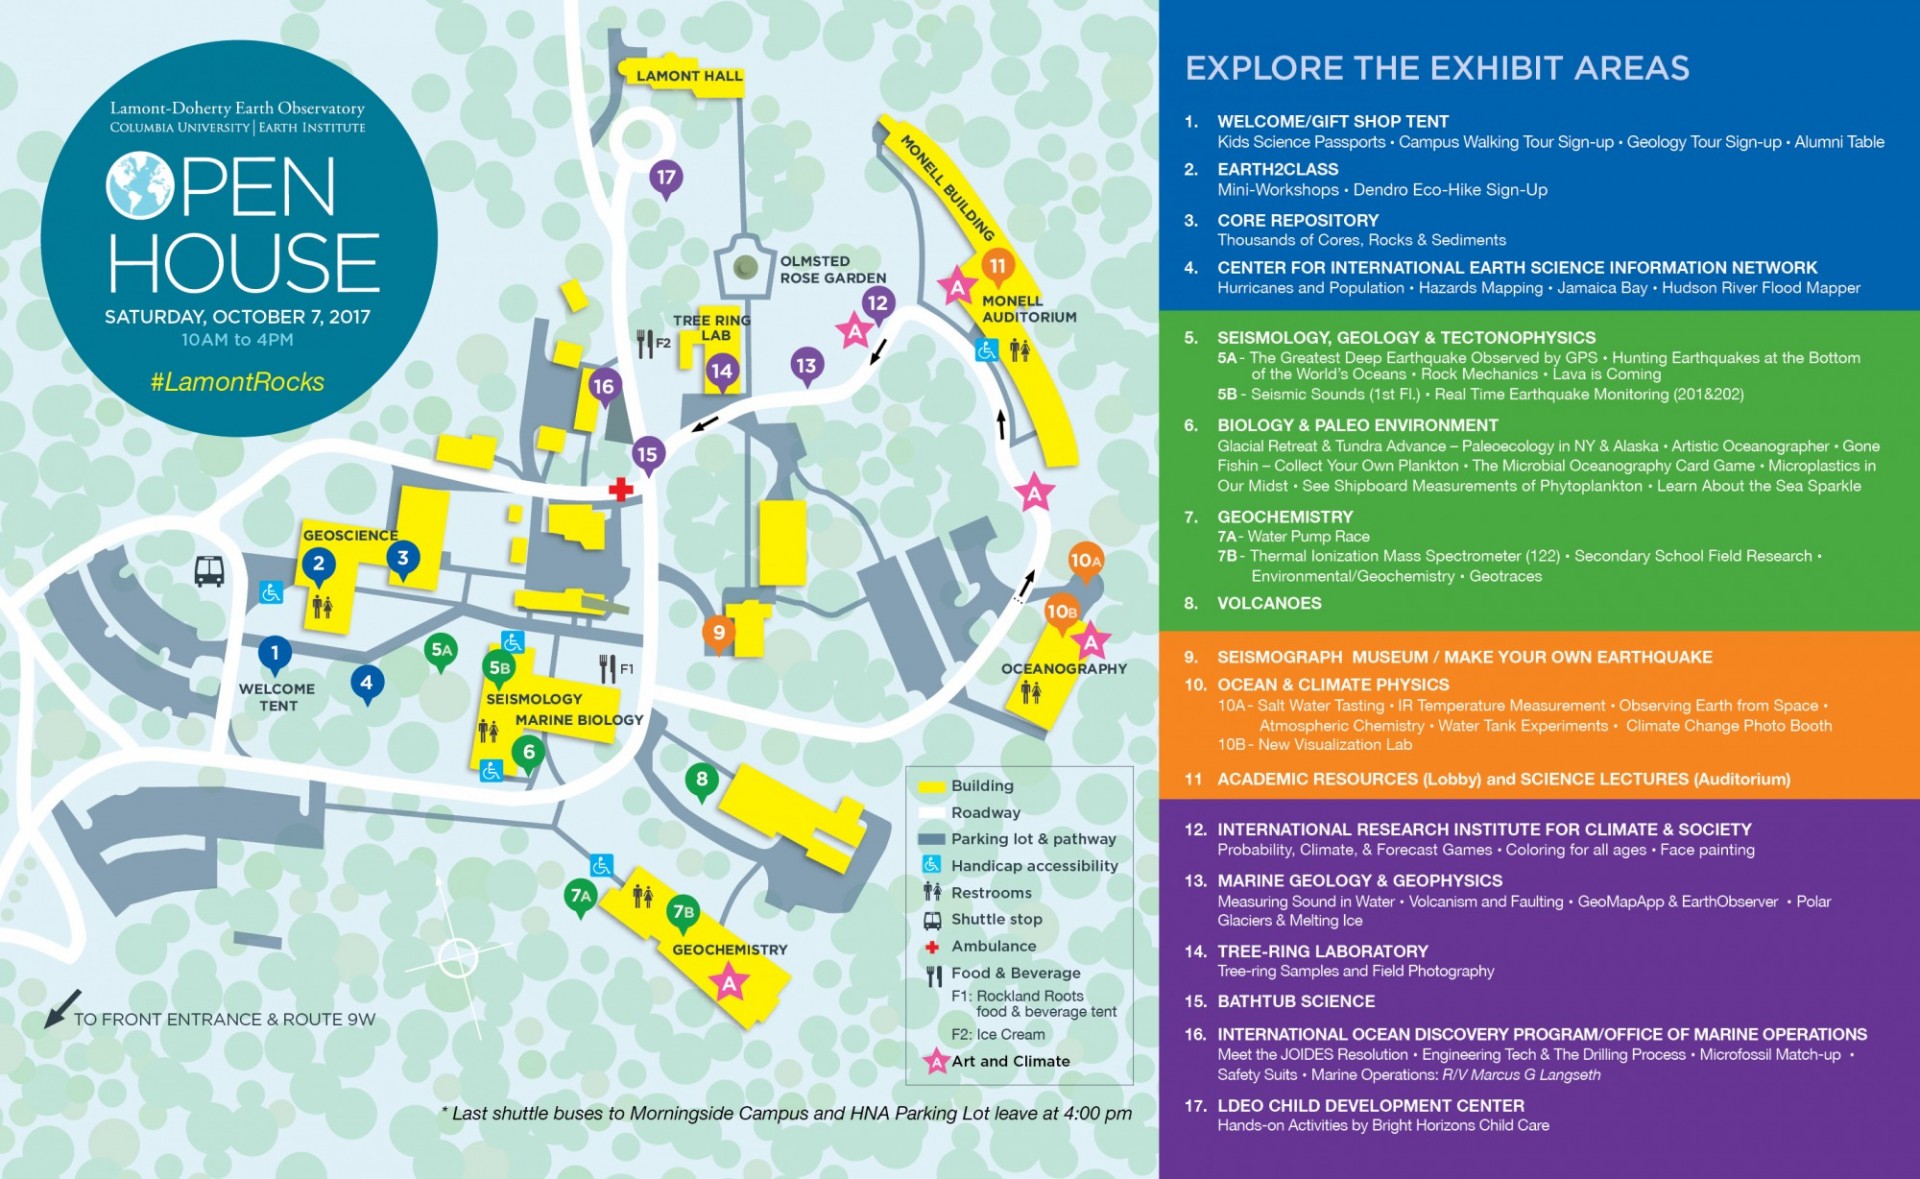 map showing location of exhibits and facilities around campus